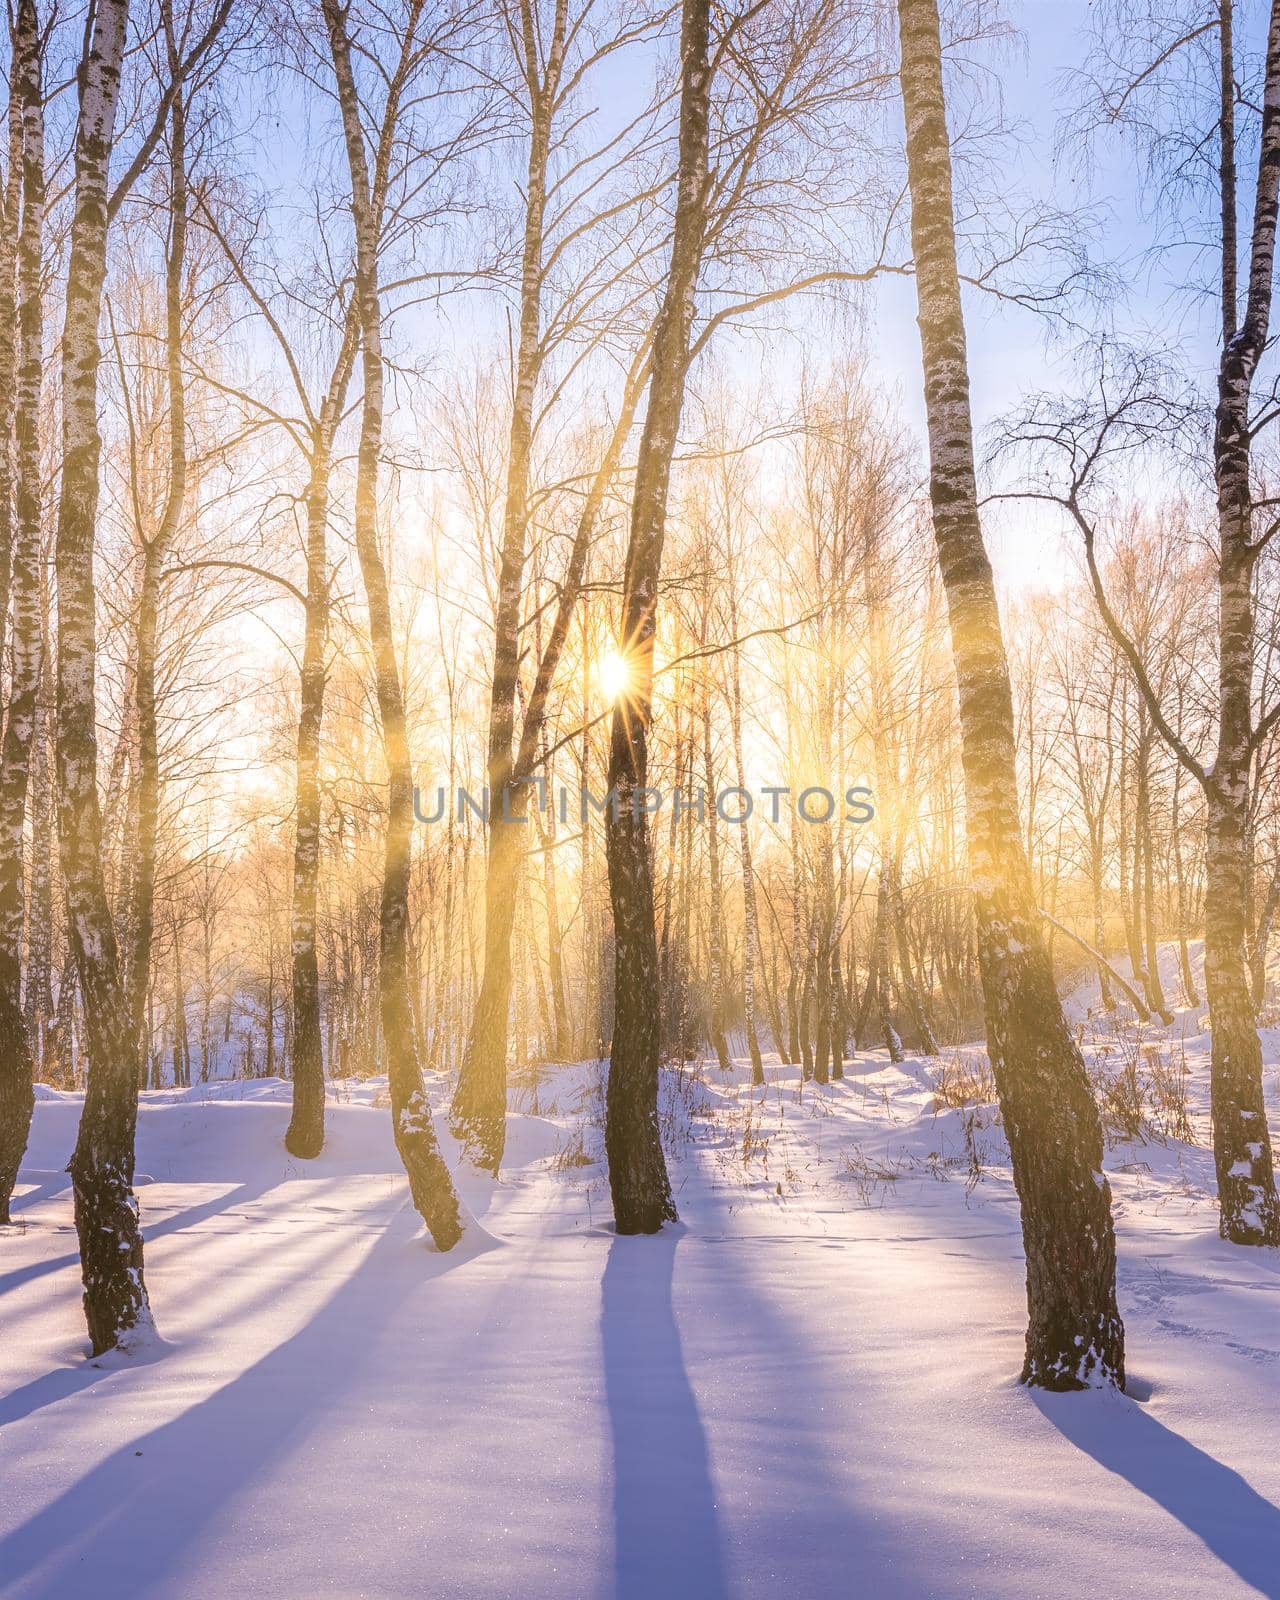 Sunset or sunrise in a birch grove with a winter snow on earth. Rows of birch trunks with the sun's rays passing through them.